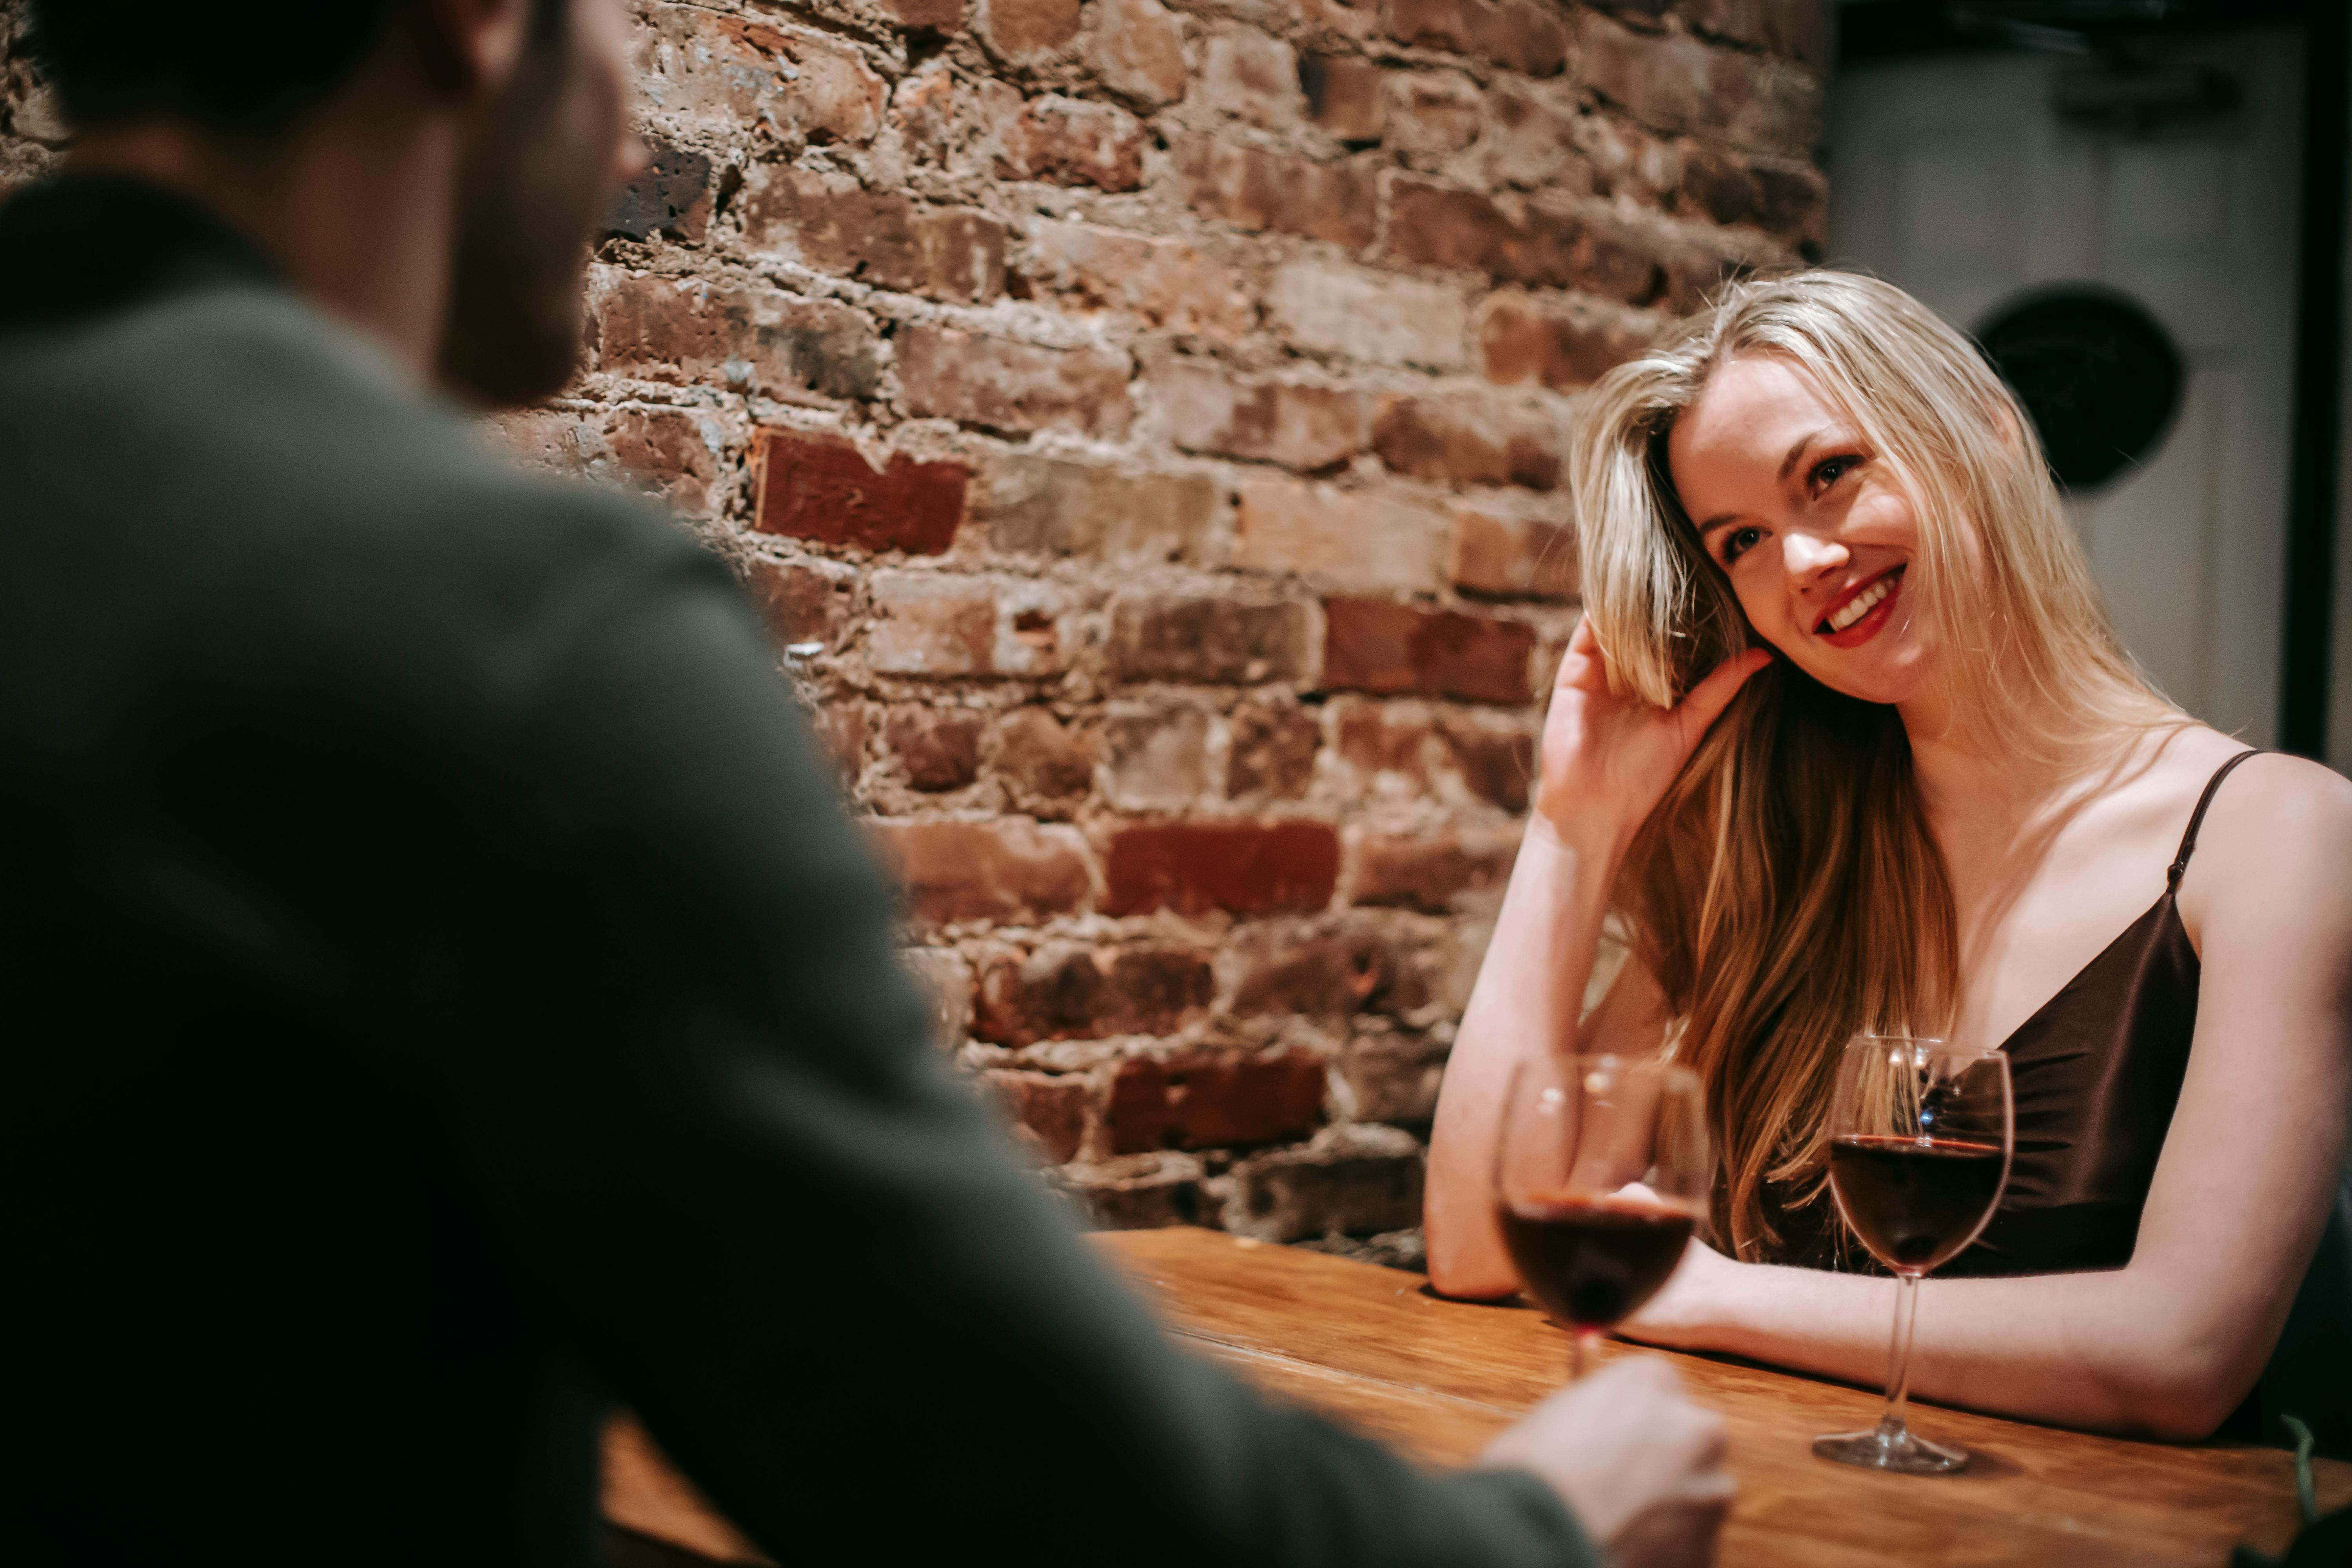 Couple in a restaurant enjoying a romantic date | Source: Pexels